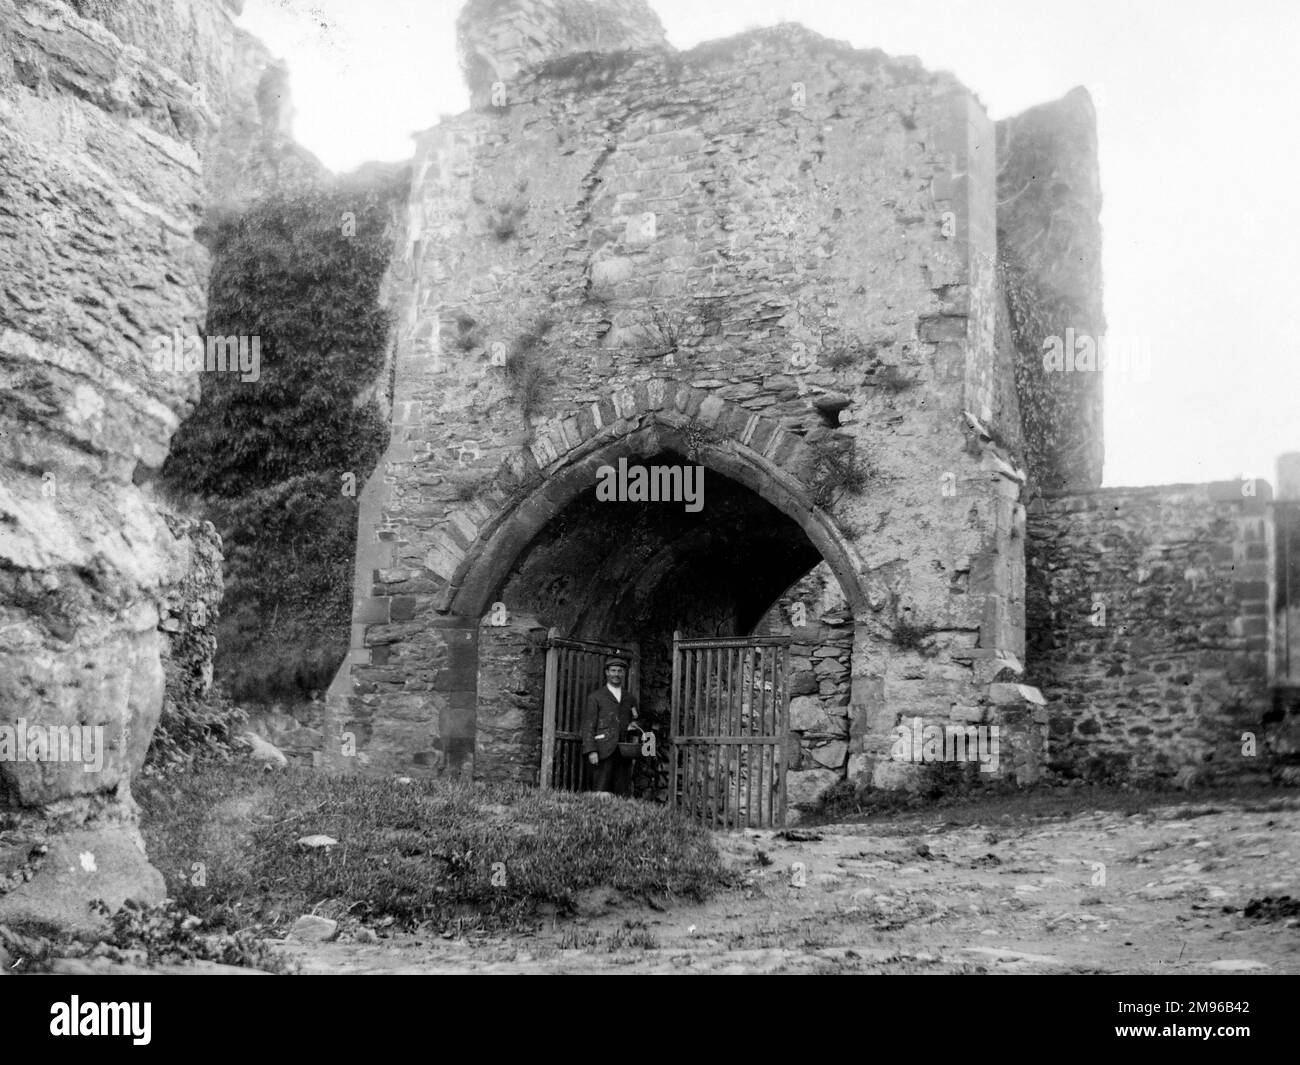 The wide gothic-style entrance to the medieval Bishop's Palace, with a man standing at the open gate, in St David's, Pembrokeshire, Dyfed, South Wales.  Some parts of the building date from the 12th century, but most of the work was done in the 14th century. Stock Photo